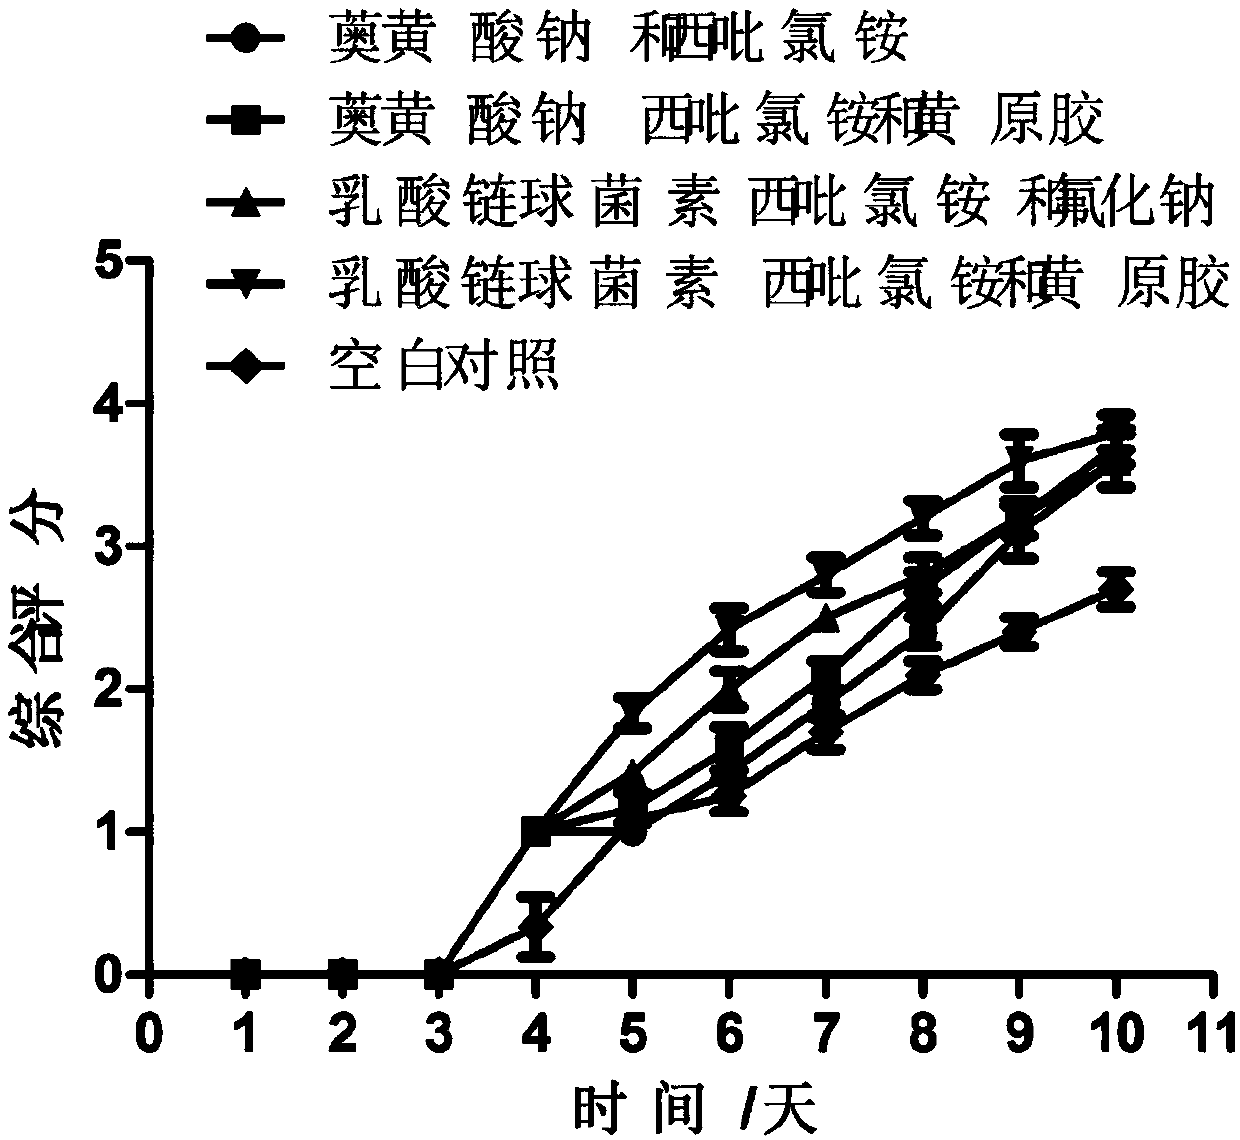 Preparation and application of nisin, cetylpyridinium chloride and sodium fluoride compound gel